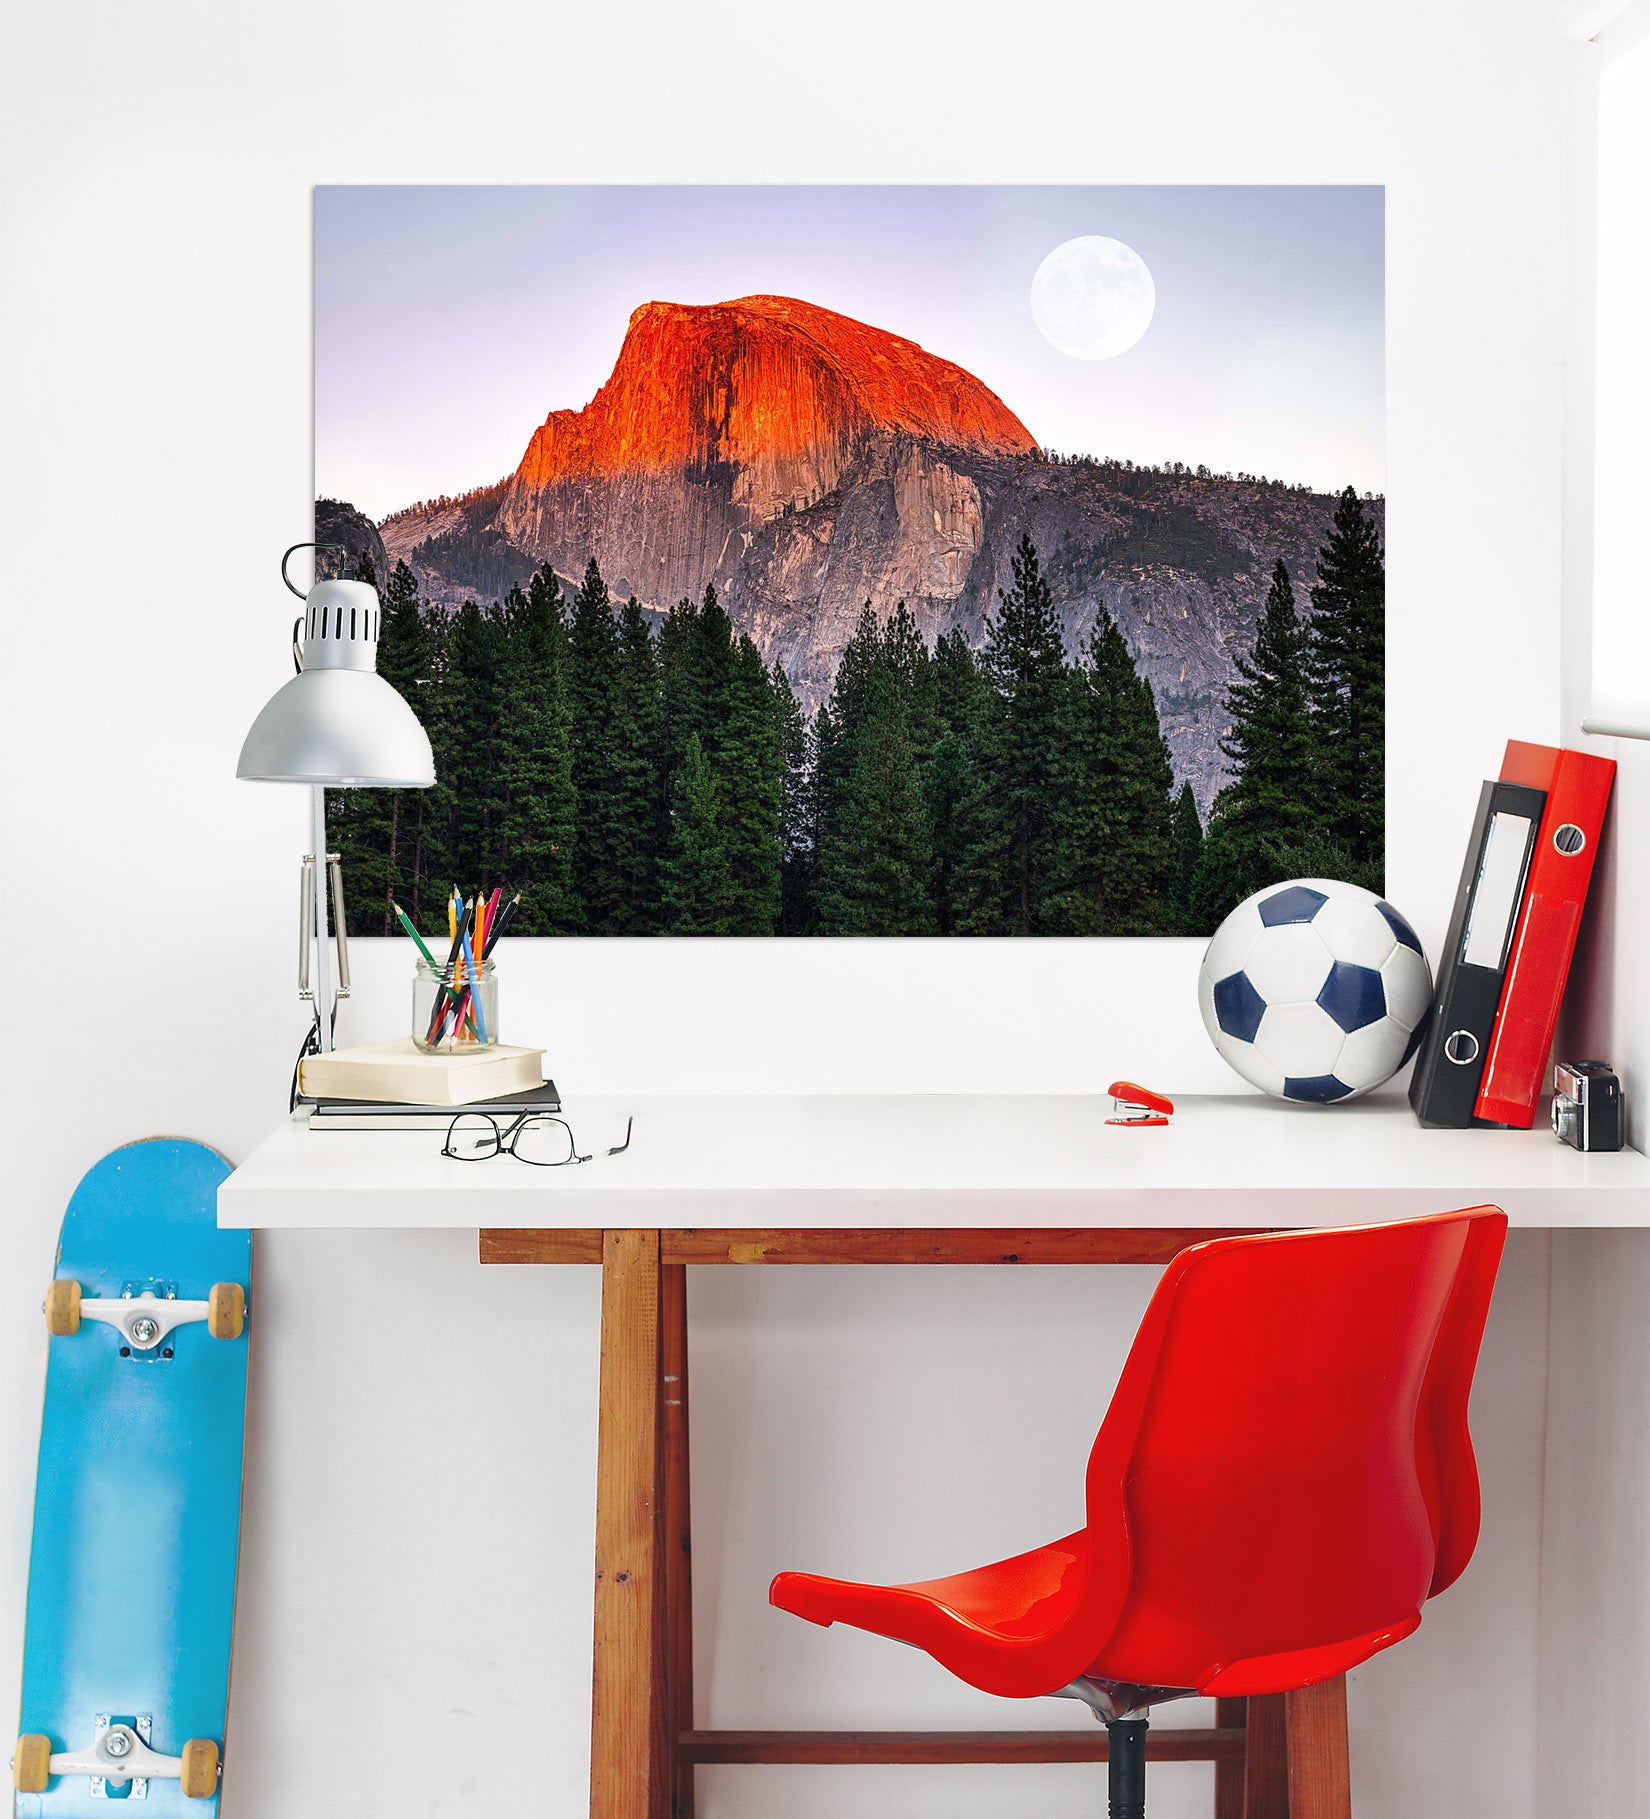 3D Red Valley 225 Marco Carmassi Wall Sticker